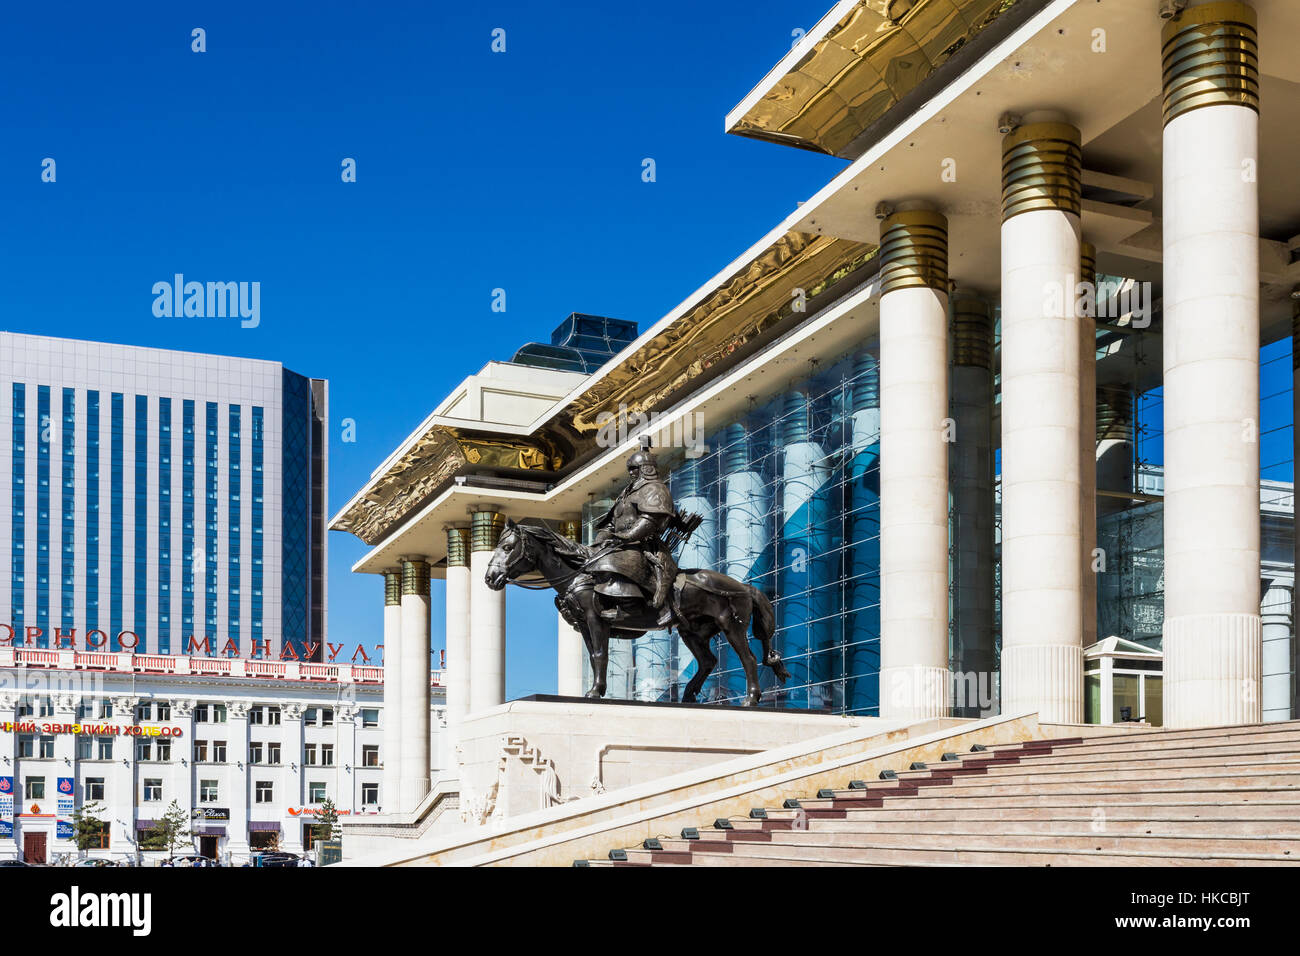 The Mongolian Parliament Building Is On The West Side Of Chinggis Khaan Square, Two Equestrian Statues Which Flank The Statue Of Chinggis Khaan, De... Stock Photo